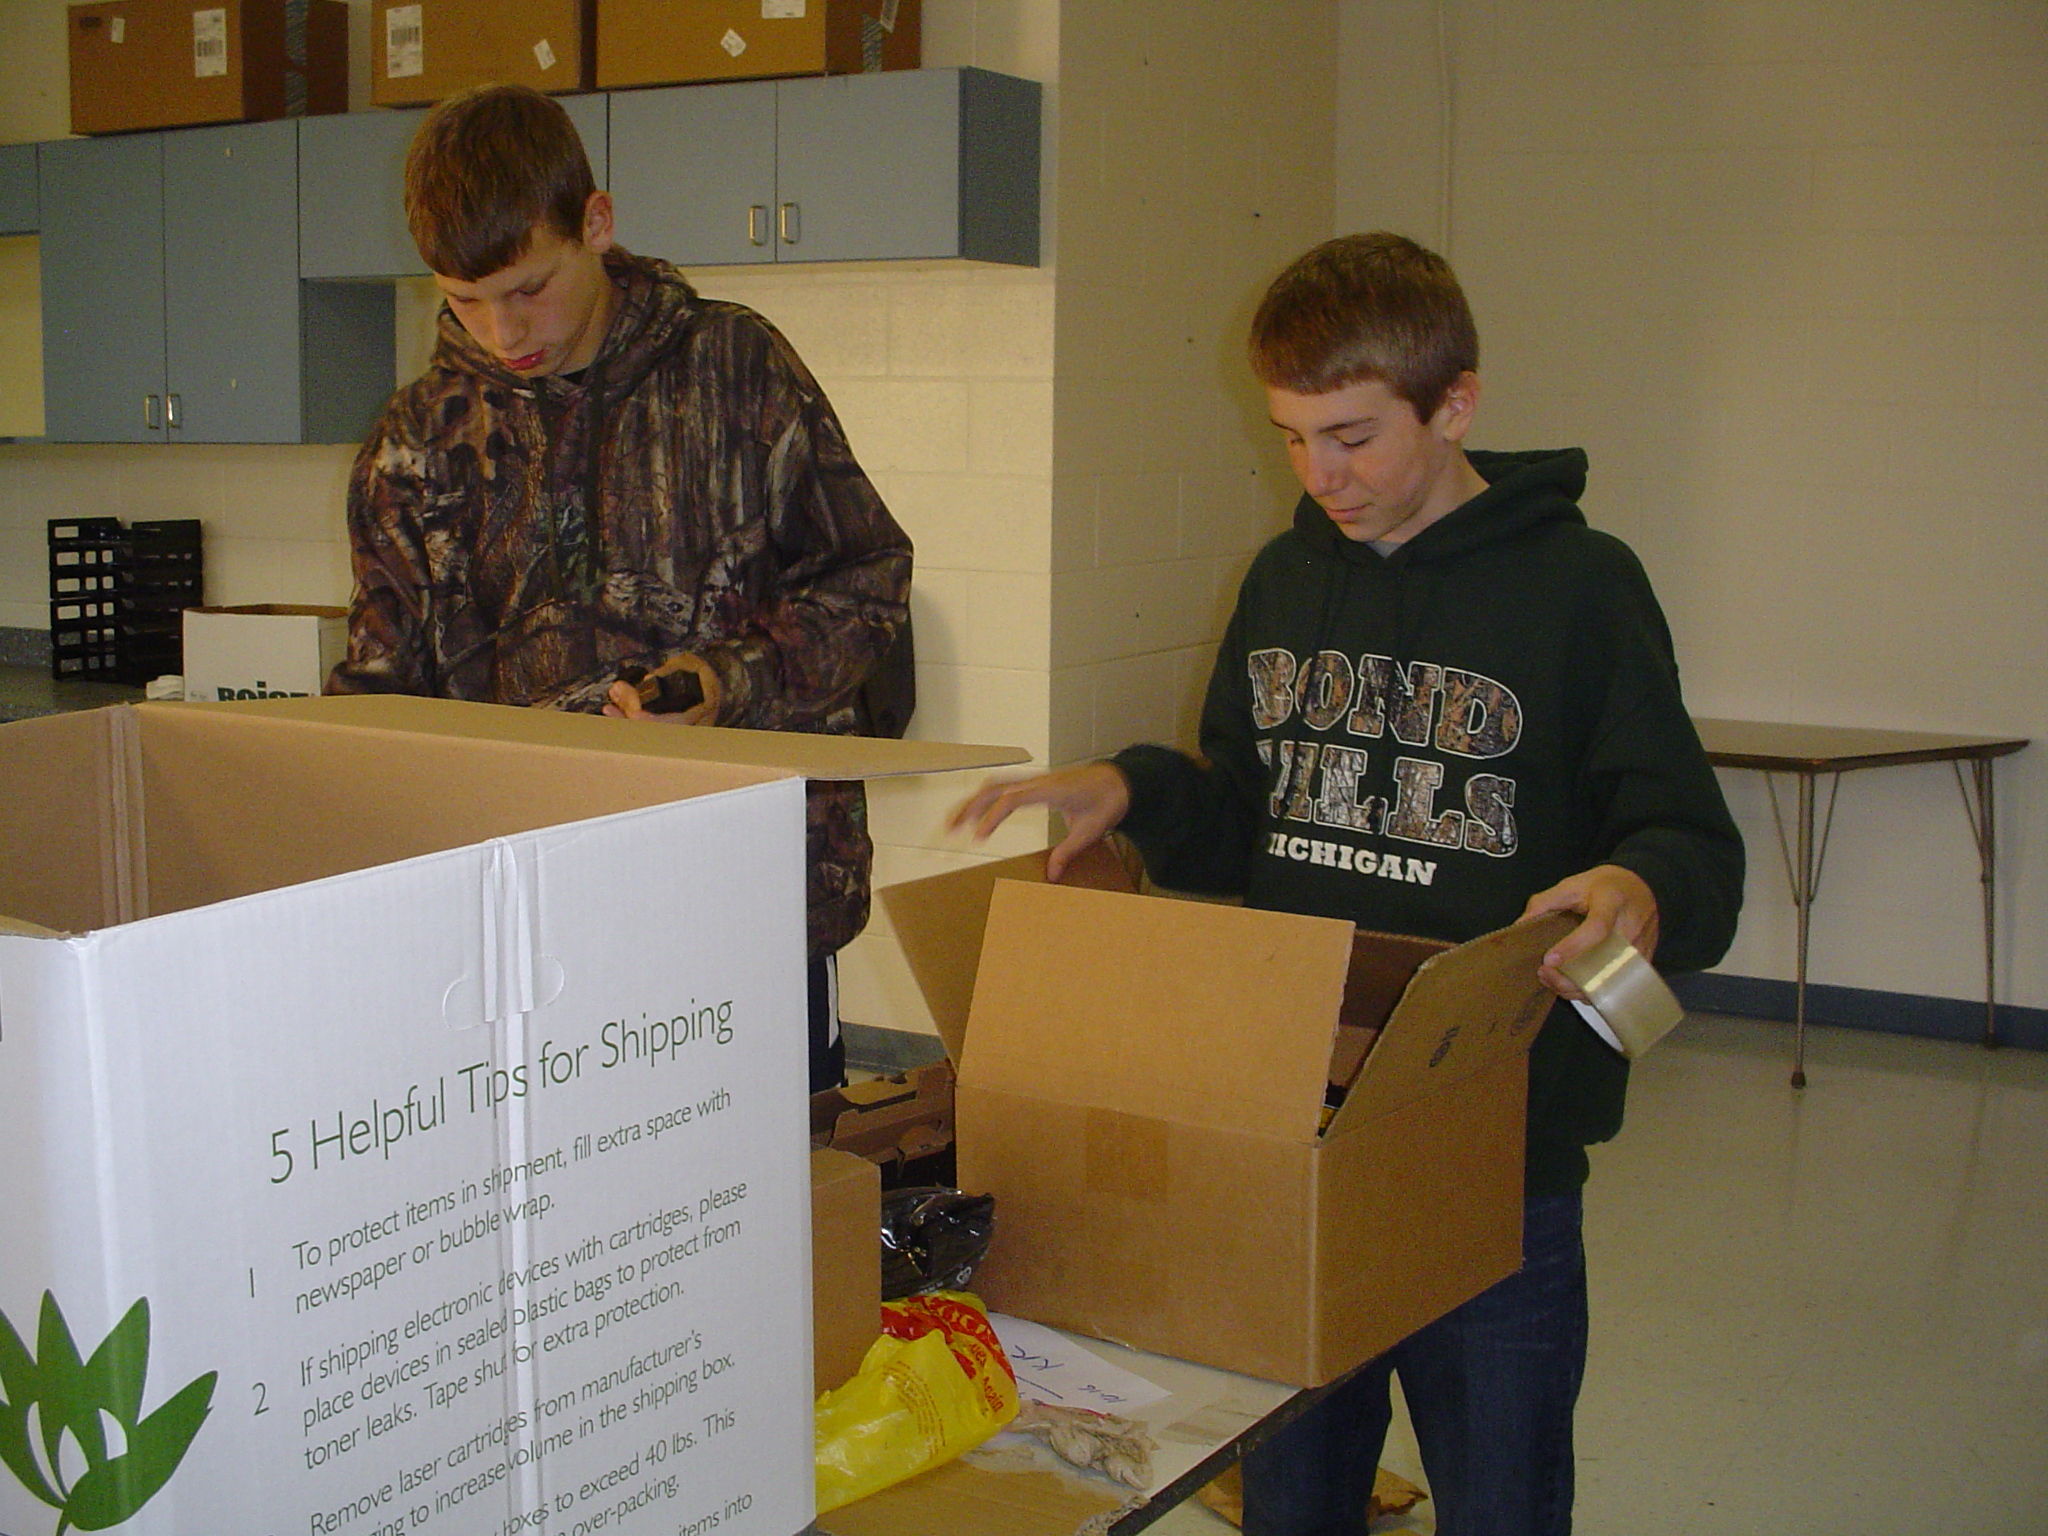 Two Ontonagon students sorting through recyclables and preparing them for shipping